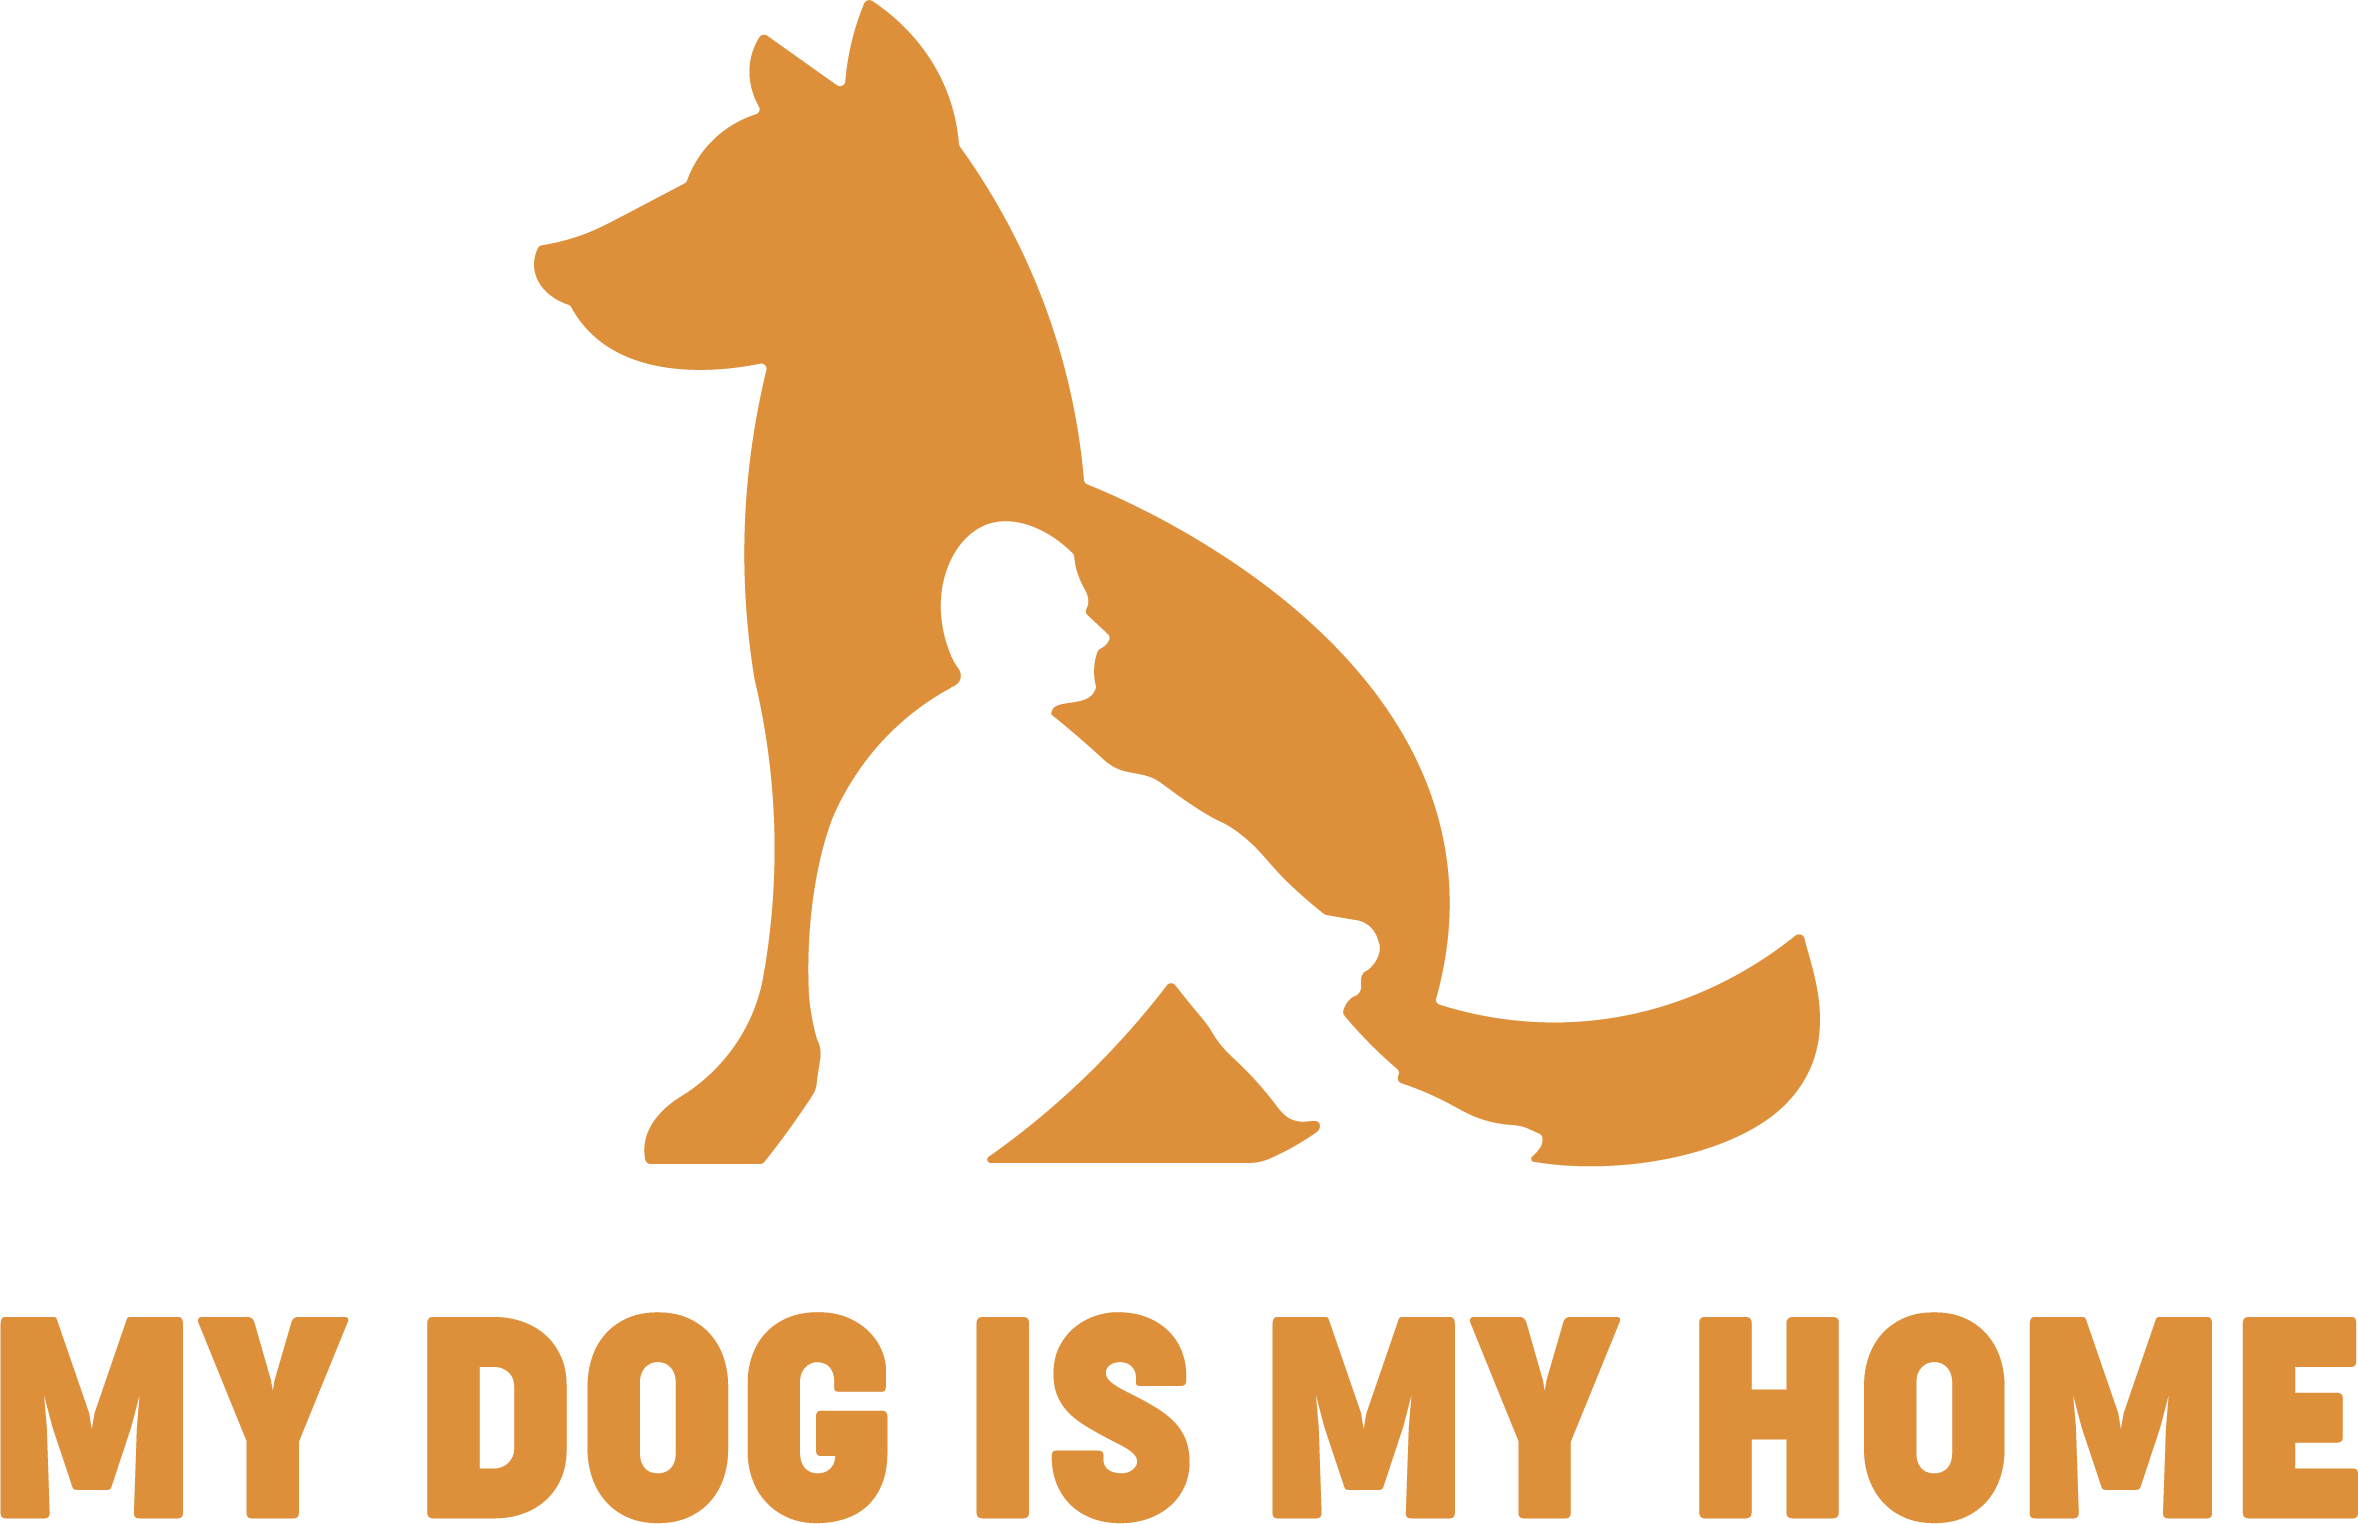 My Dog is My Home